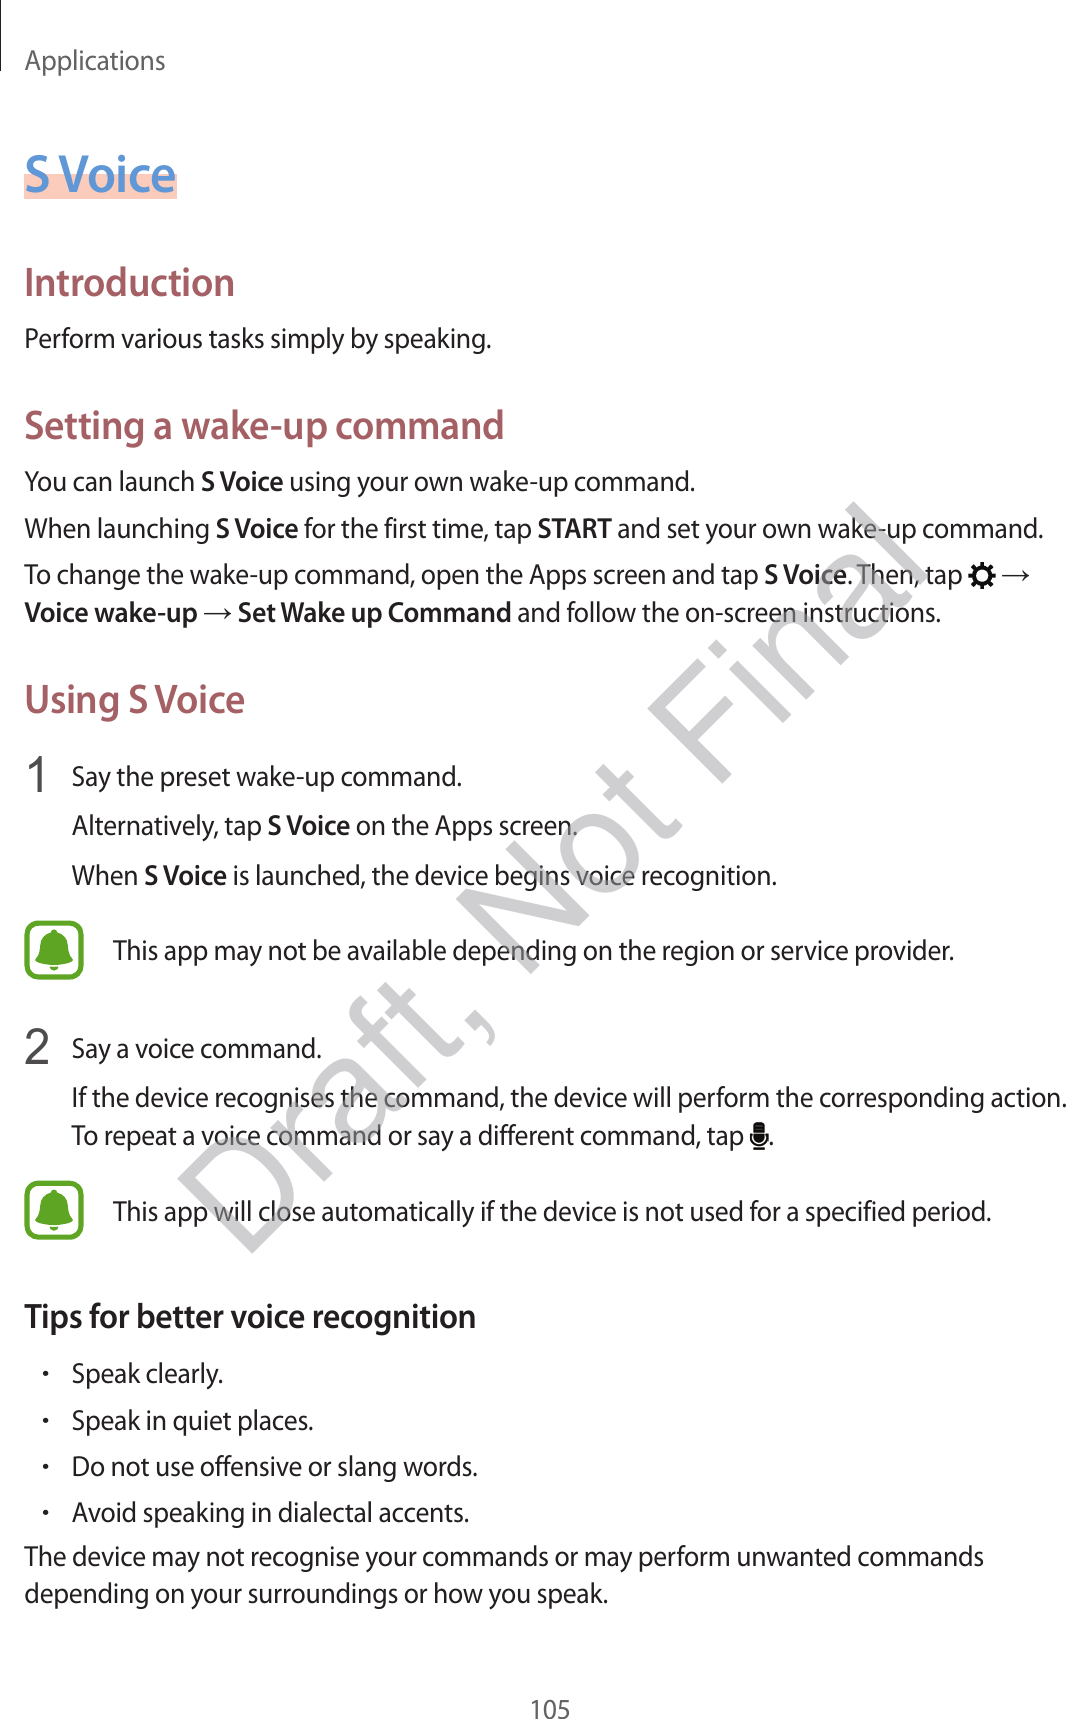 Applications105S VoiceIntroductionPerform various tasks simply by speaking.Setting a wake-up commandYou can launch S Voice using your own wake-up command.When launching S Voice for the first time, tap START and set your own wake-up command.To change the wake-up command, open the Apps screen and tap S Voice. Then, tap    Voice wake-up  Set Wake up Command and follow the on-screen instructions.Using S Voice1  Say the preset wake-up command.Alternatively, tap S Voice on the Apps screen.When S Voice is launched, the device begins voice recognition.This app may not be available depending on the region or service provider.2  Say a voice command.If the device recognises the command, the device will perform the corresponding action. To repeat a voice command or say a different command, tap  .This app will close automatically if the device is not used for a specified period.Tips for better voice recognition•Speak clearly.•Speak in quiet places.•Do not use offensive or slang words.•Avoid speaking in dialectal accents.The device may not recognise your commands or may perform unwanted commands depending on your surroundings or how you speak.Draft, Not Final